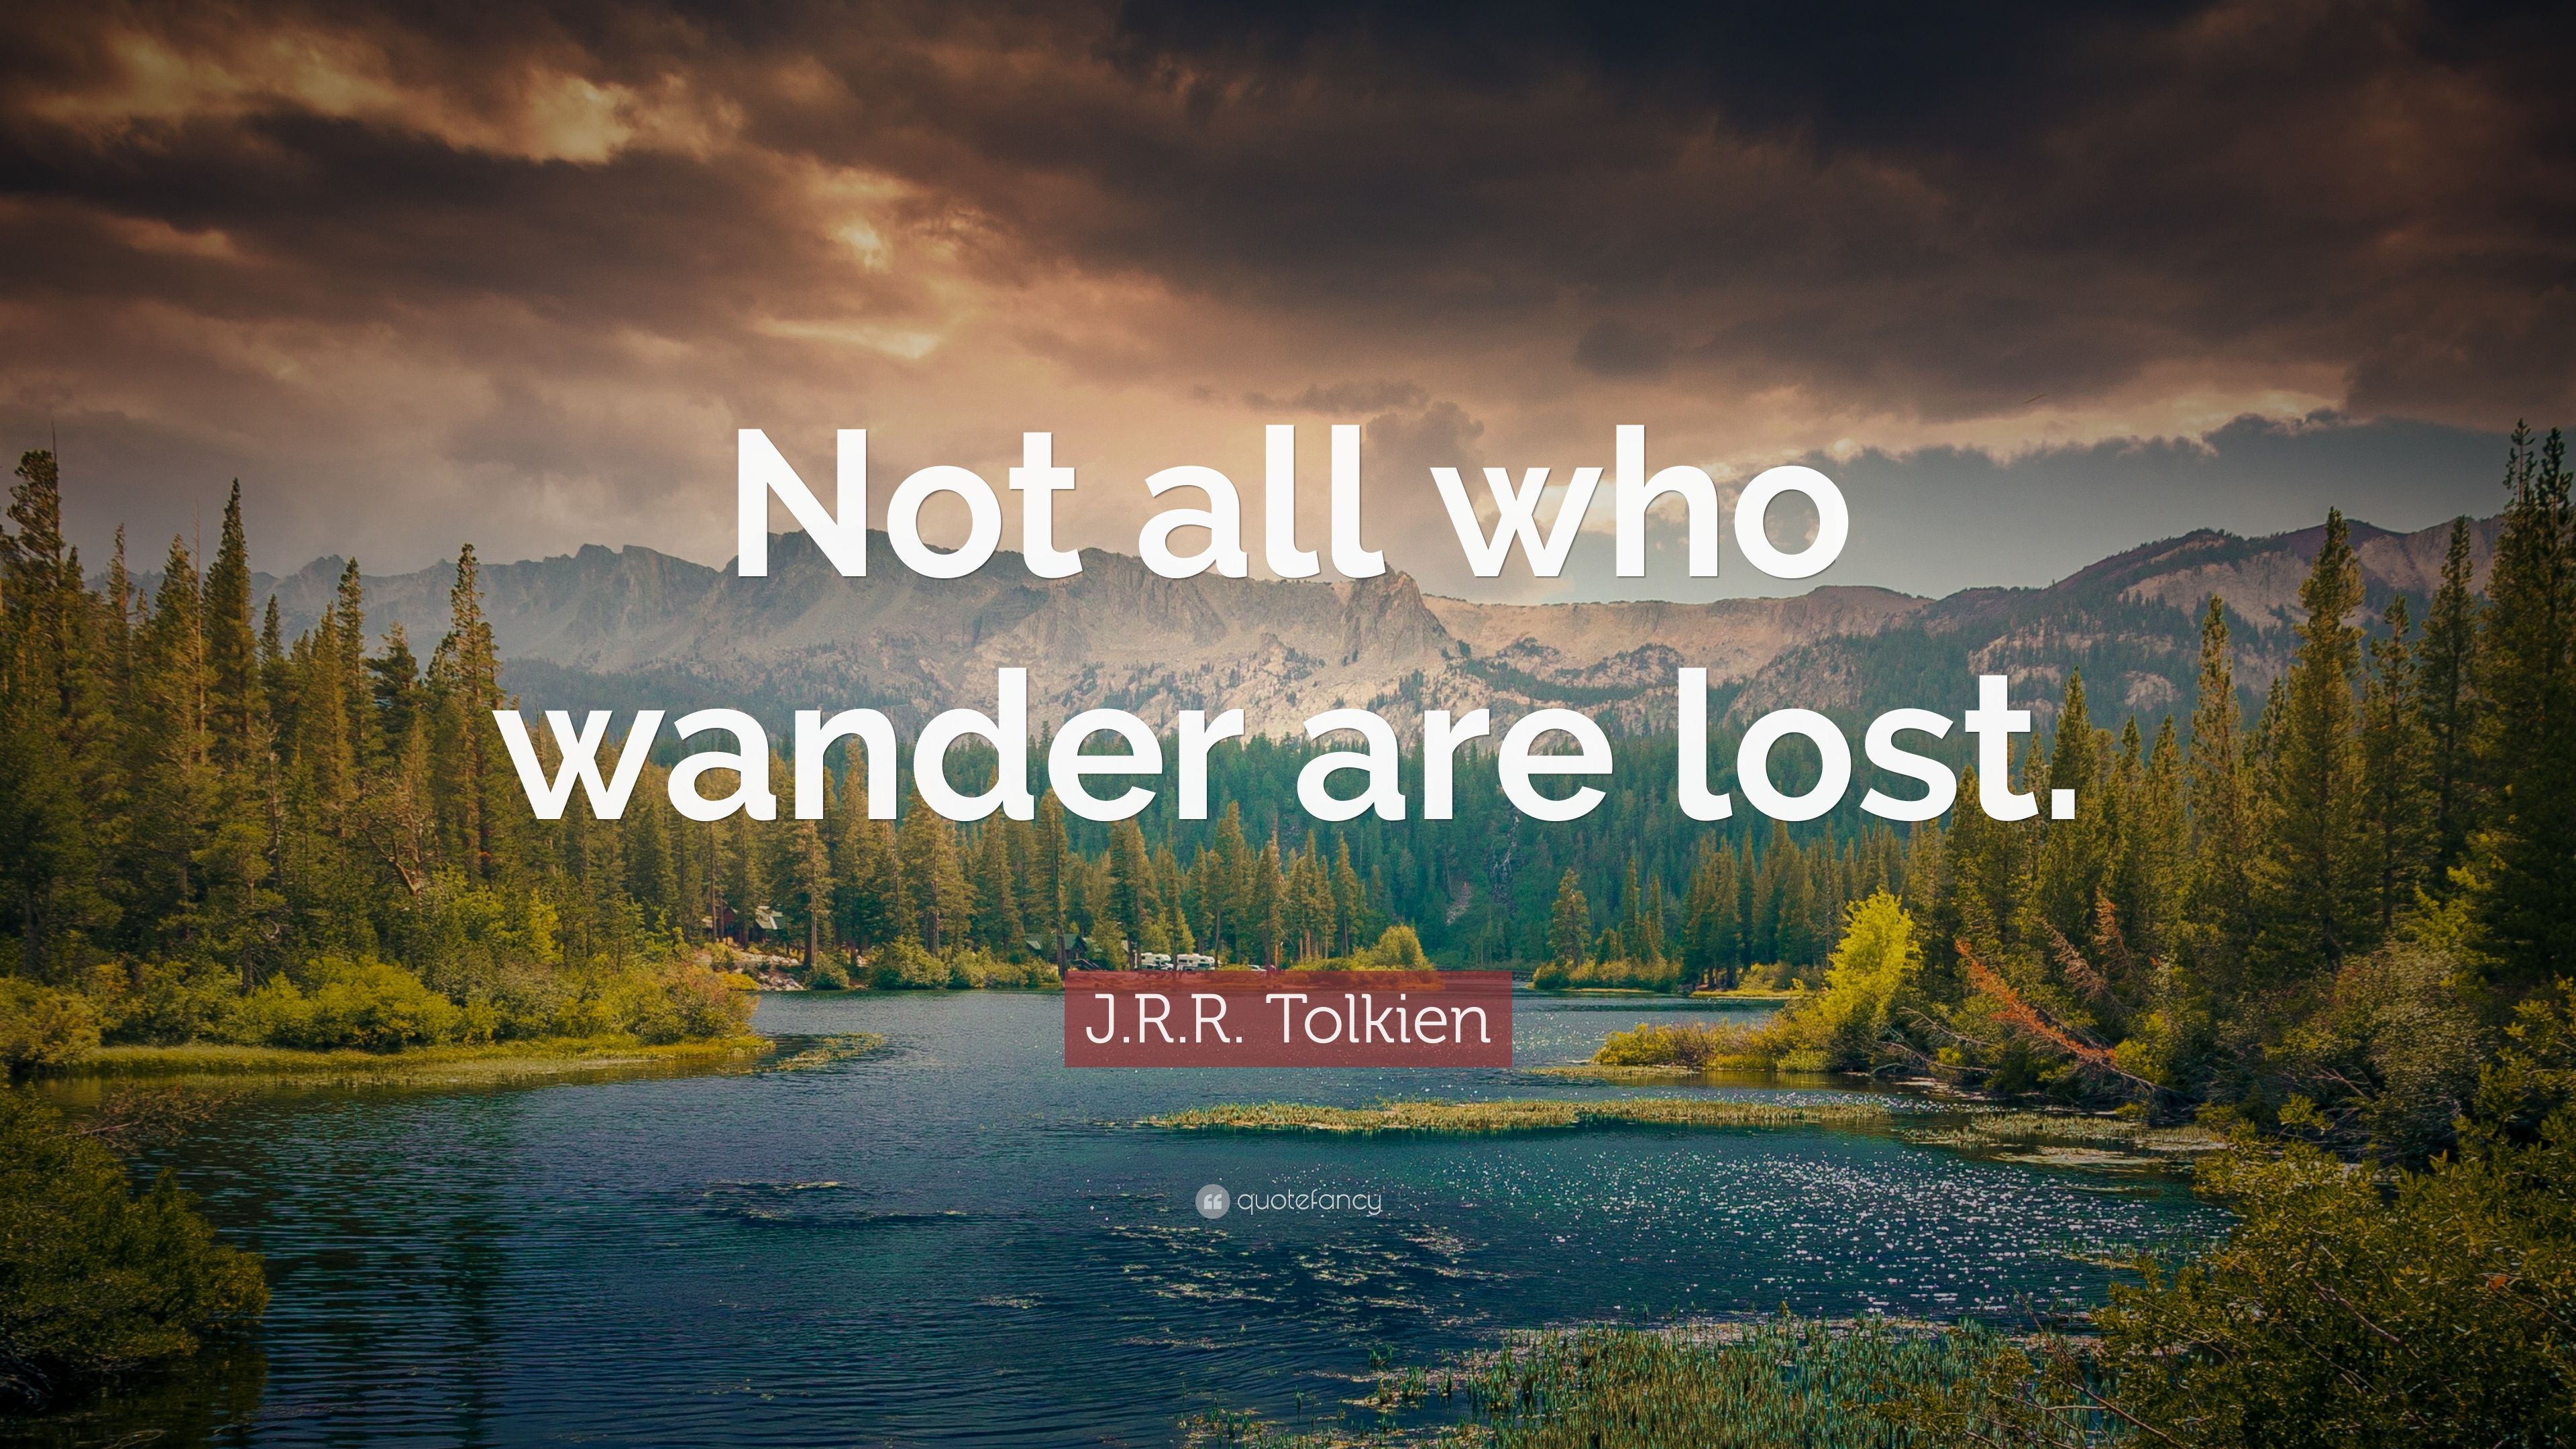 J. R. R. Tolkien Quote: “Not all who wander are lost.” (21 wallpaper)